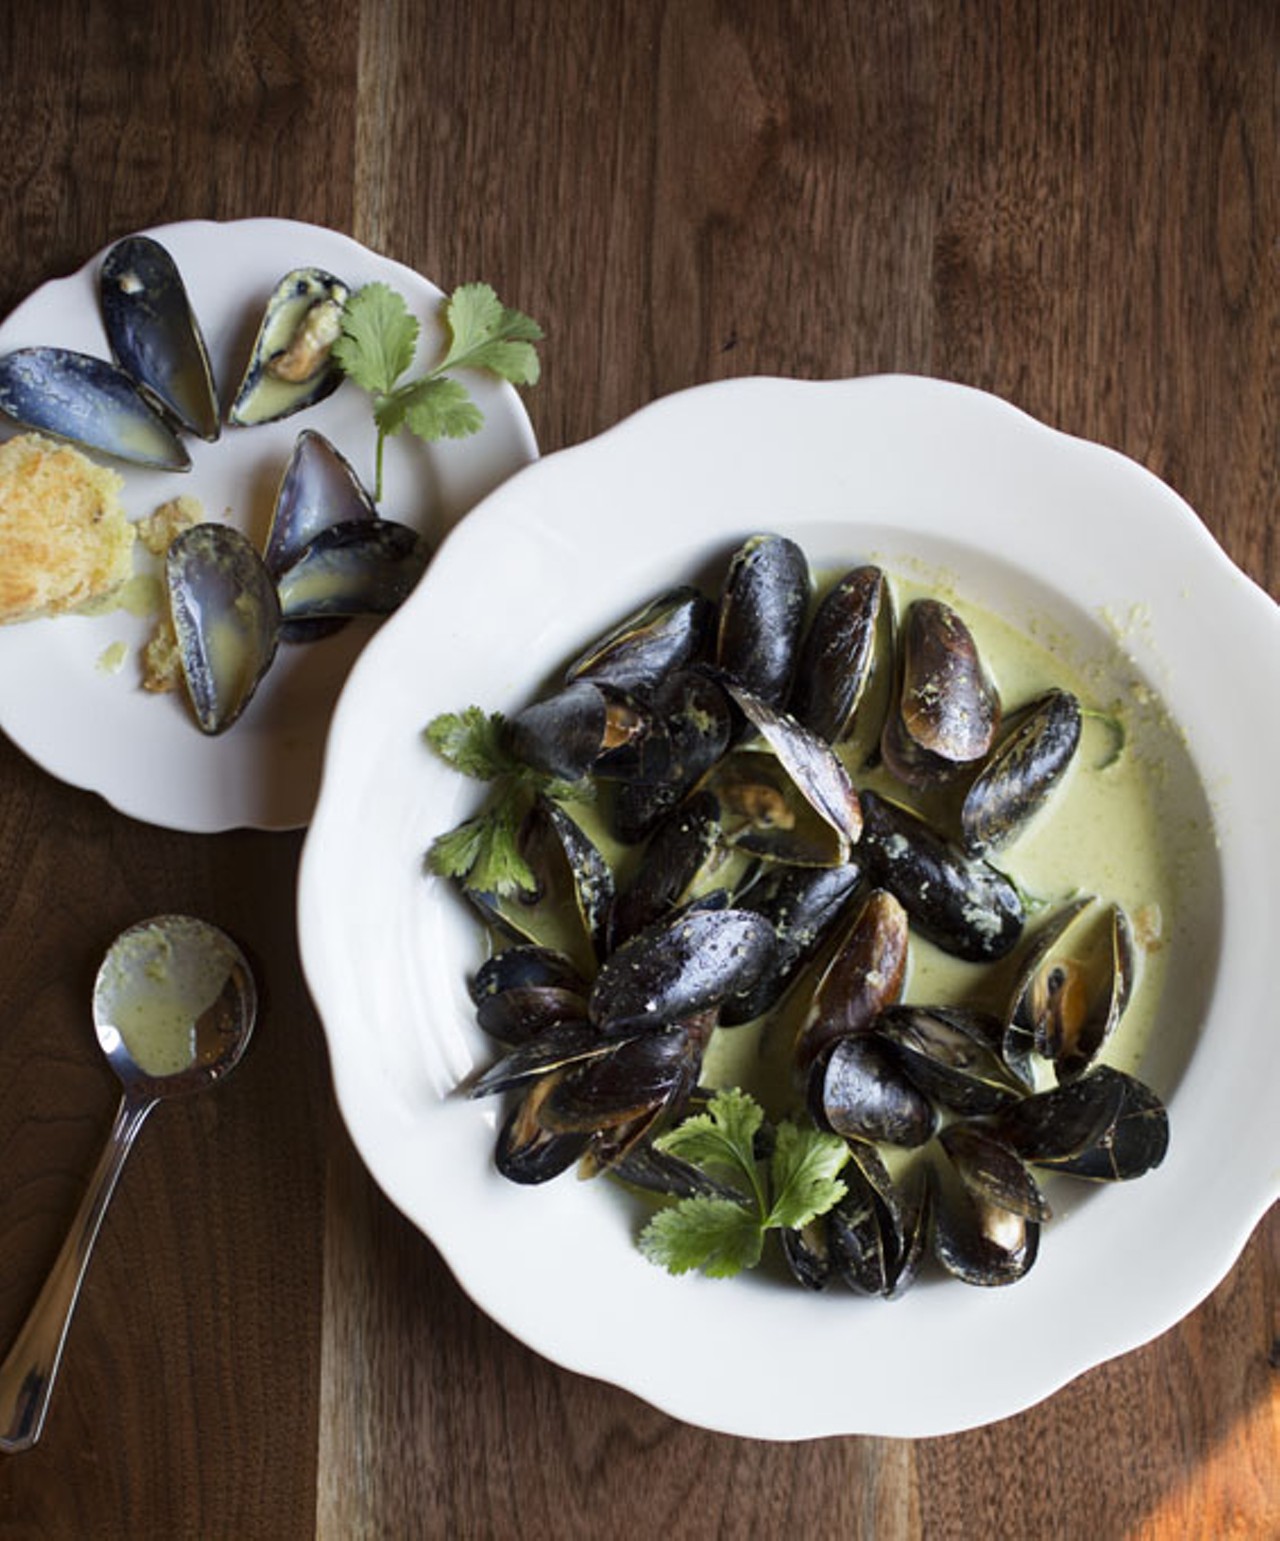 The mussel stew, served with cornbread, is sauteed in a green curry-coconut milk sauce.